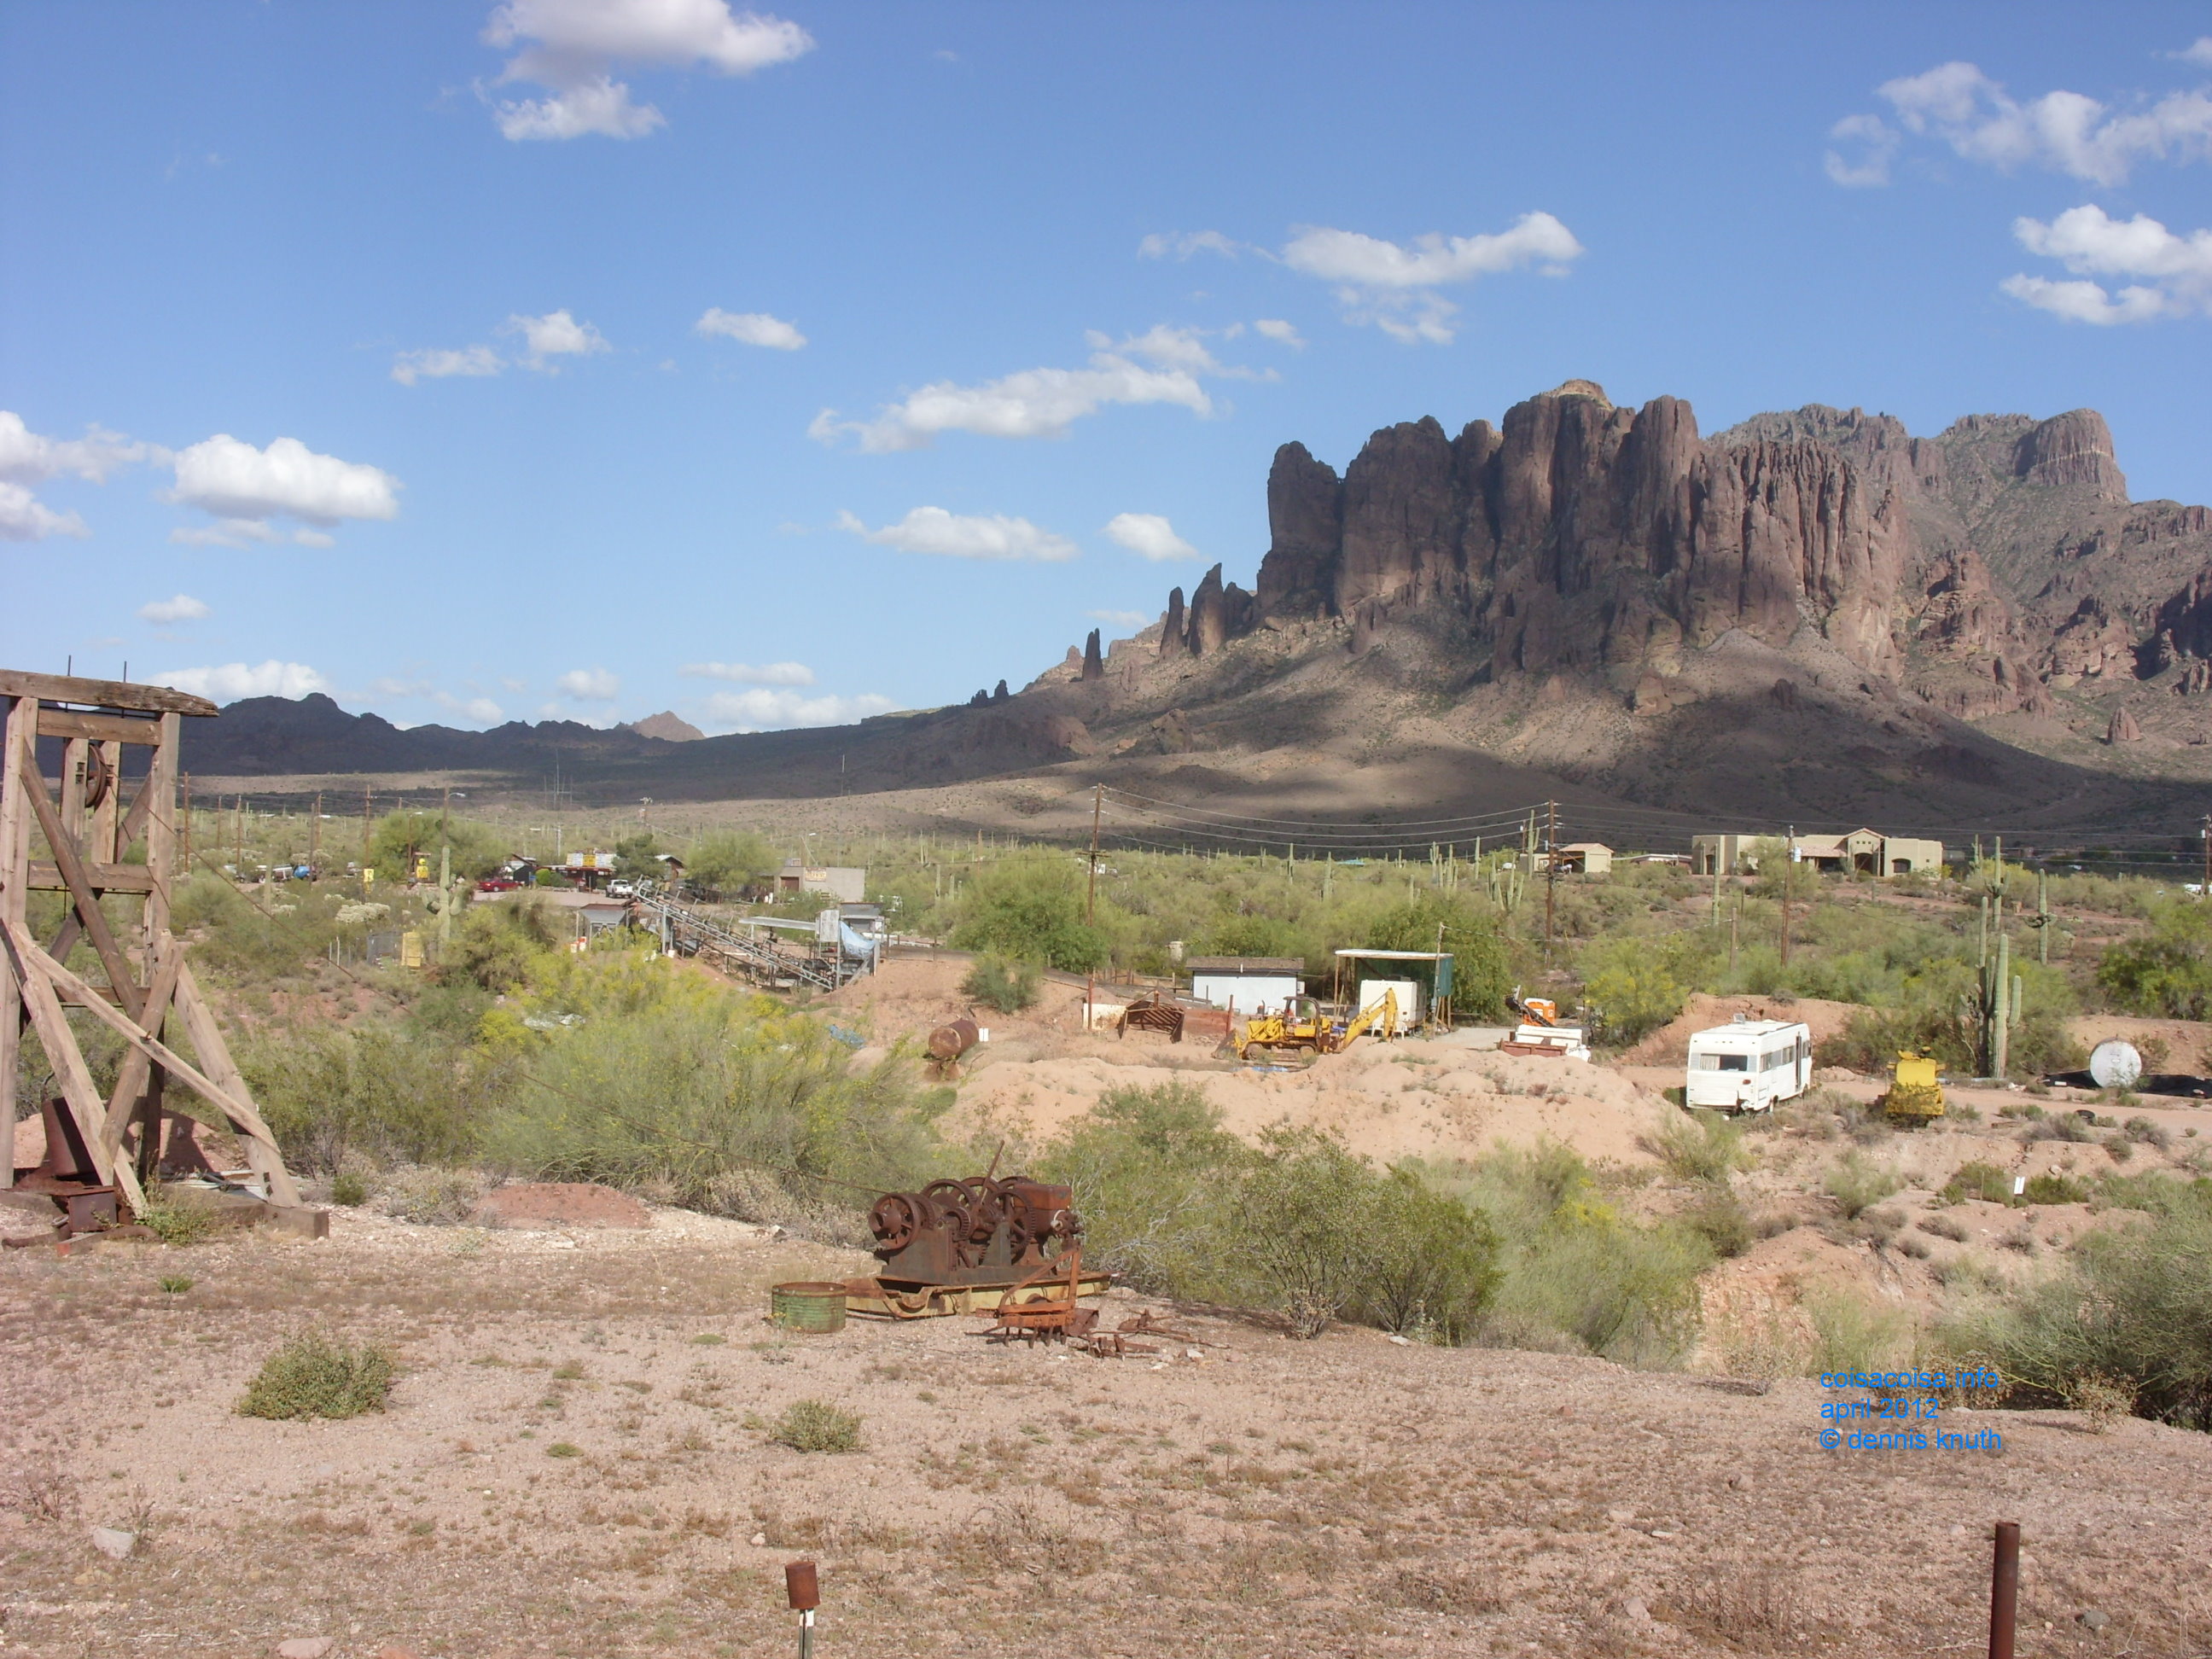 2012_04_26_e_apache_junction_ghost_town_0015.jpg (large)